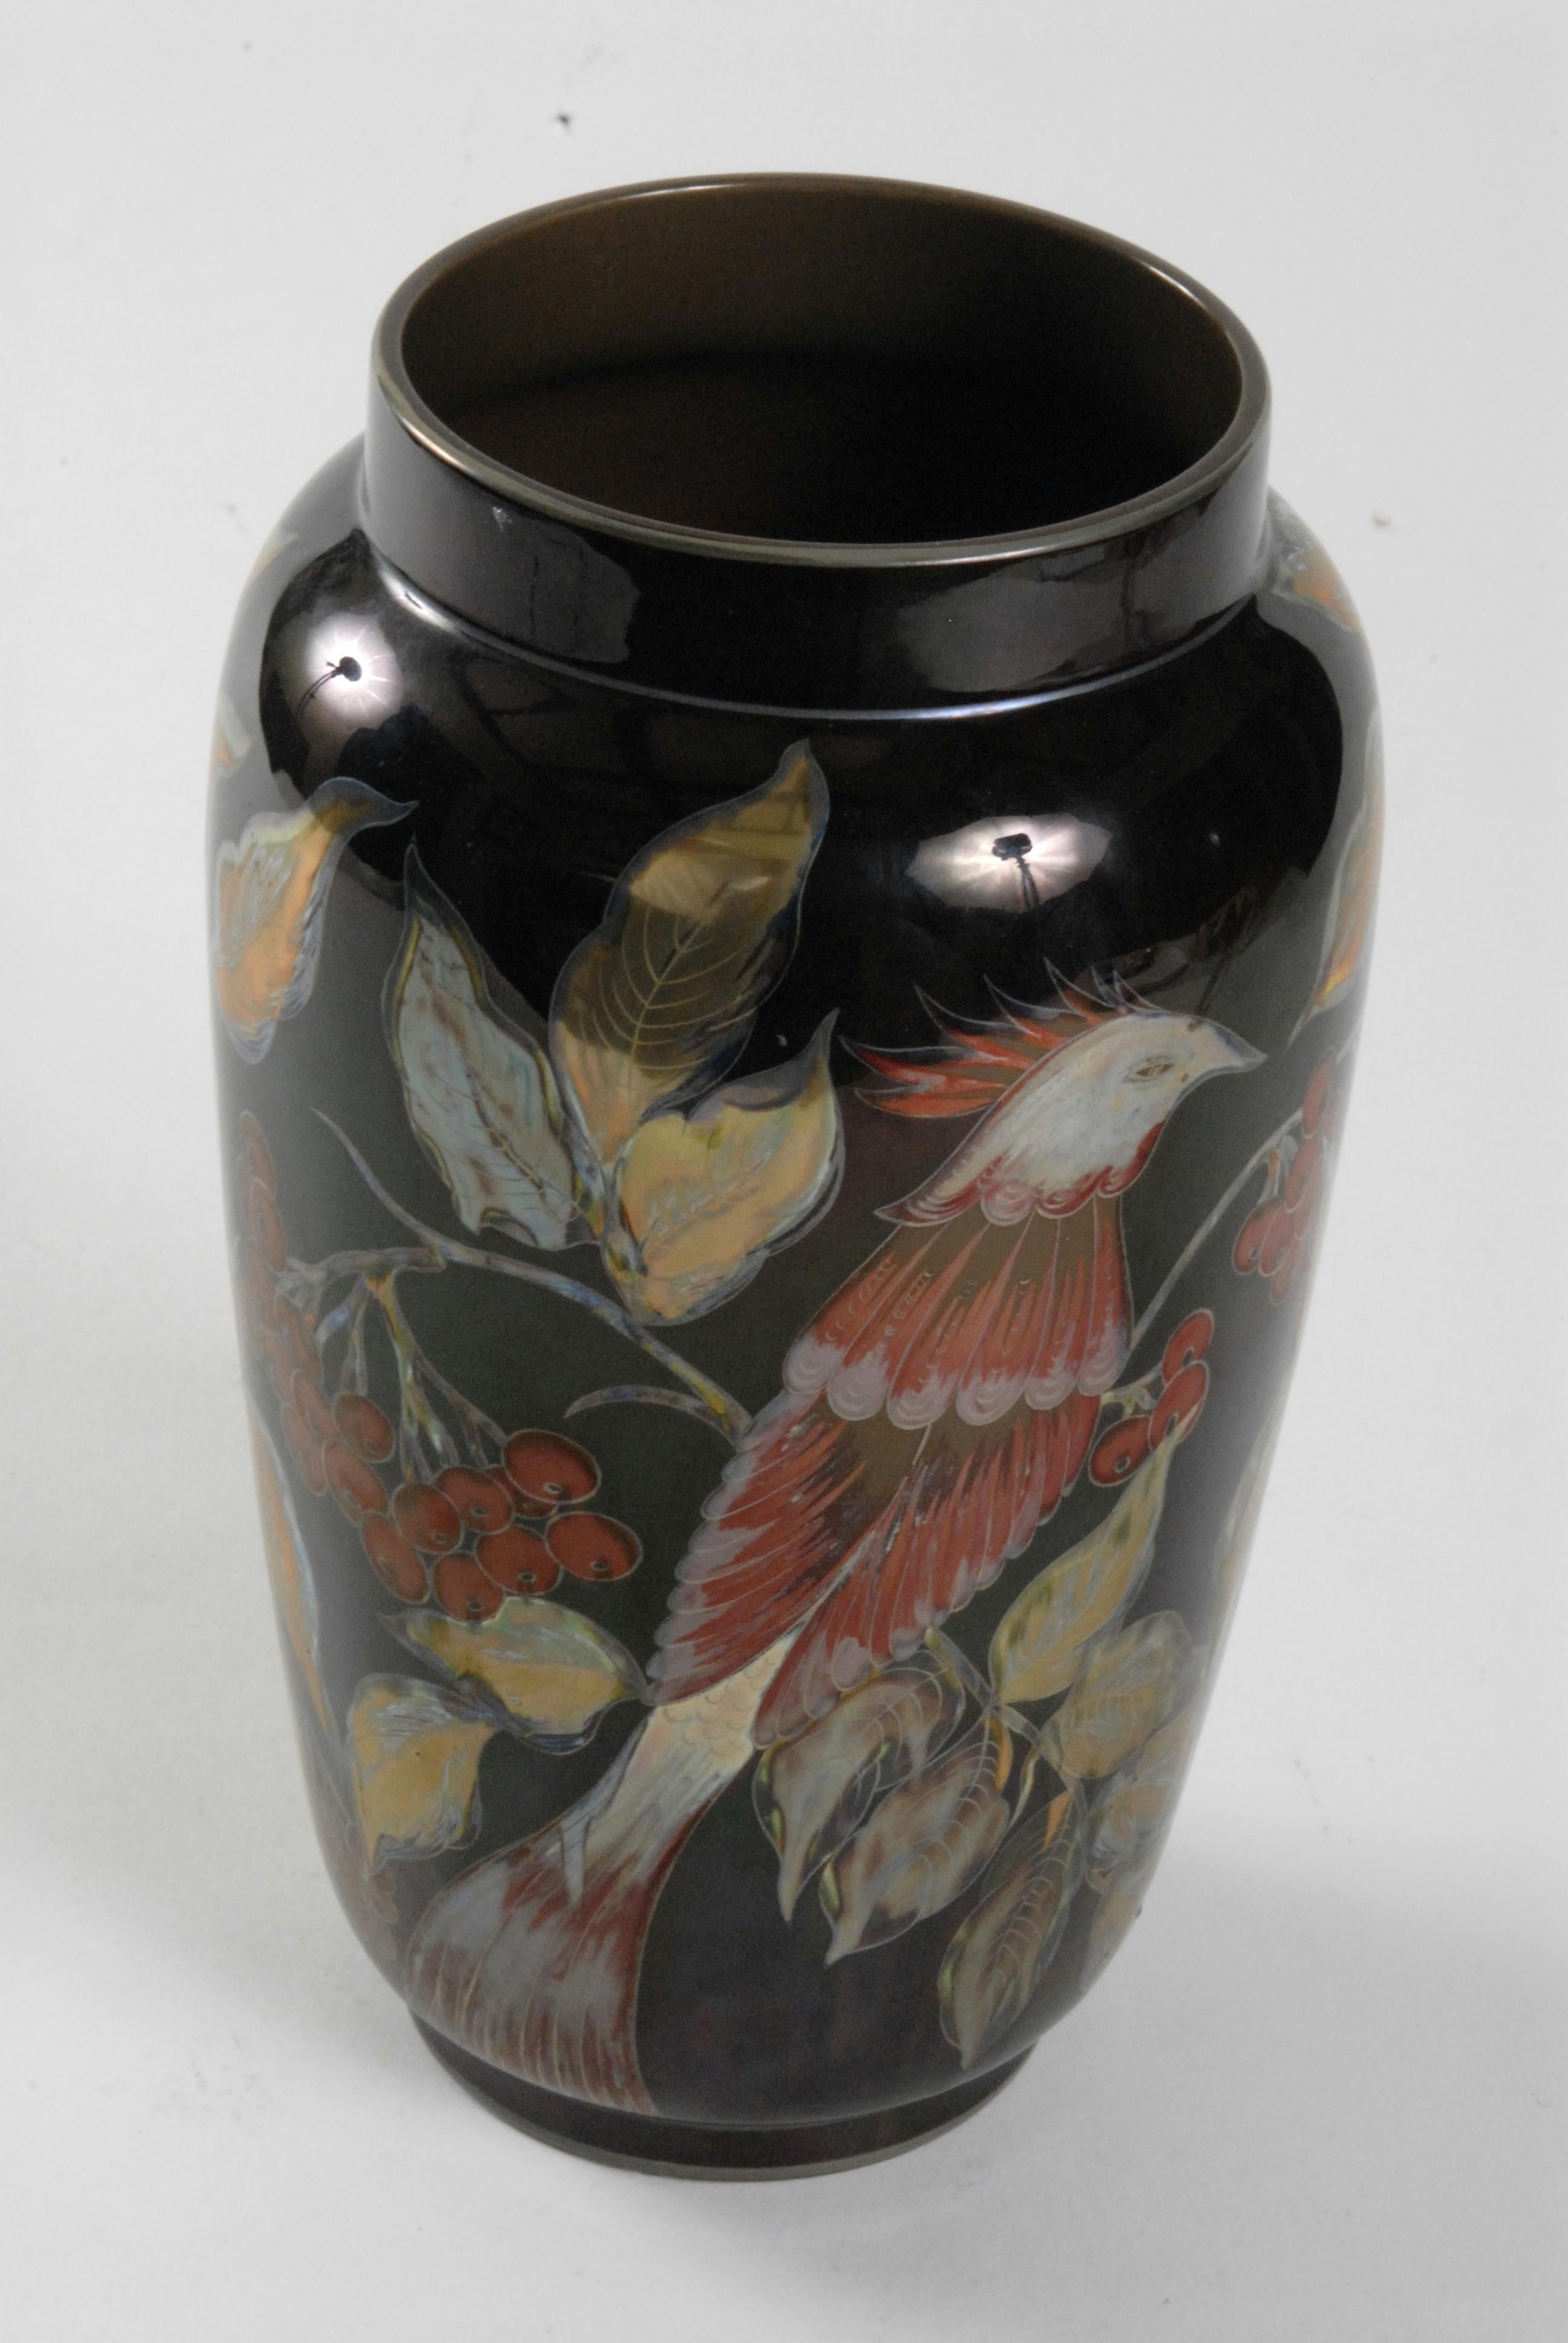 decor exclusive made in italy vase